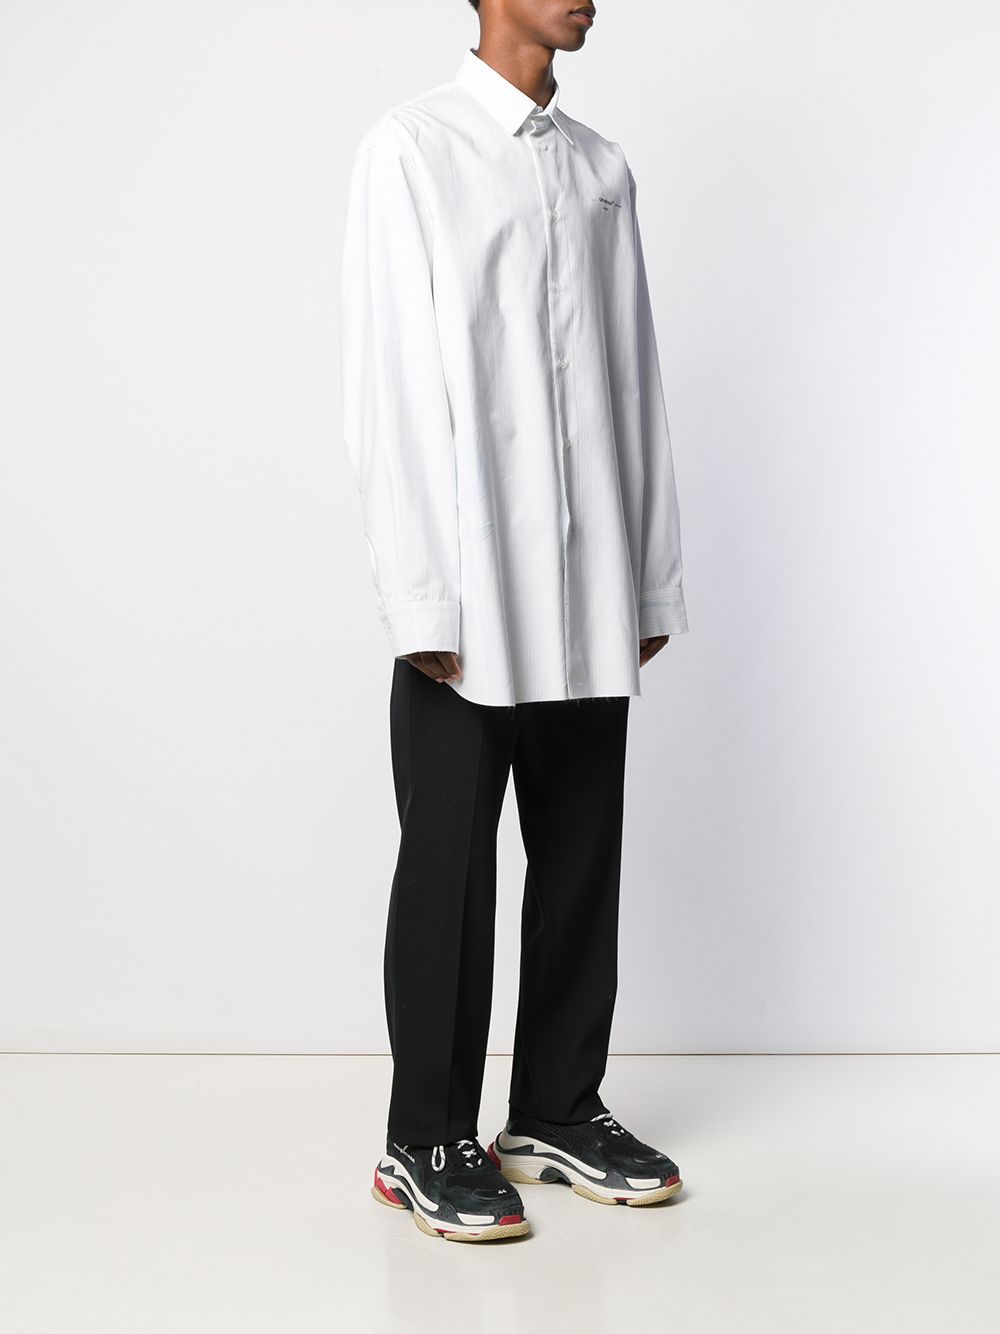 Off-White Floral Embroidered Striped Oversized Shirt - Farfetch